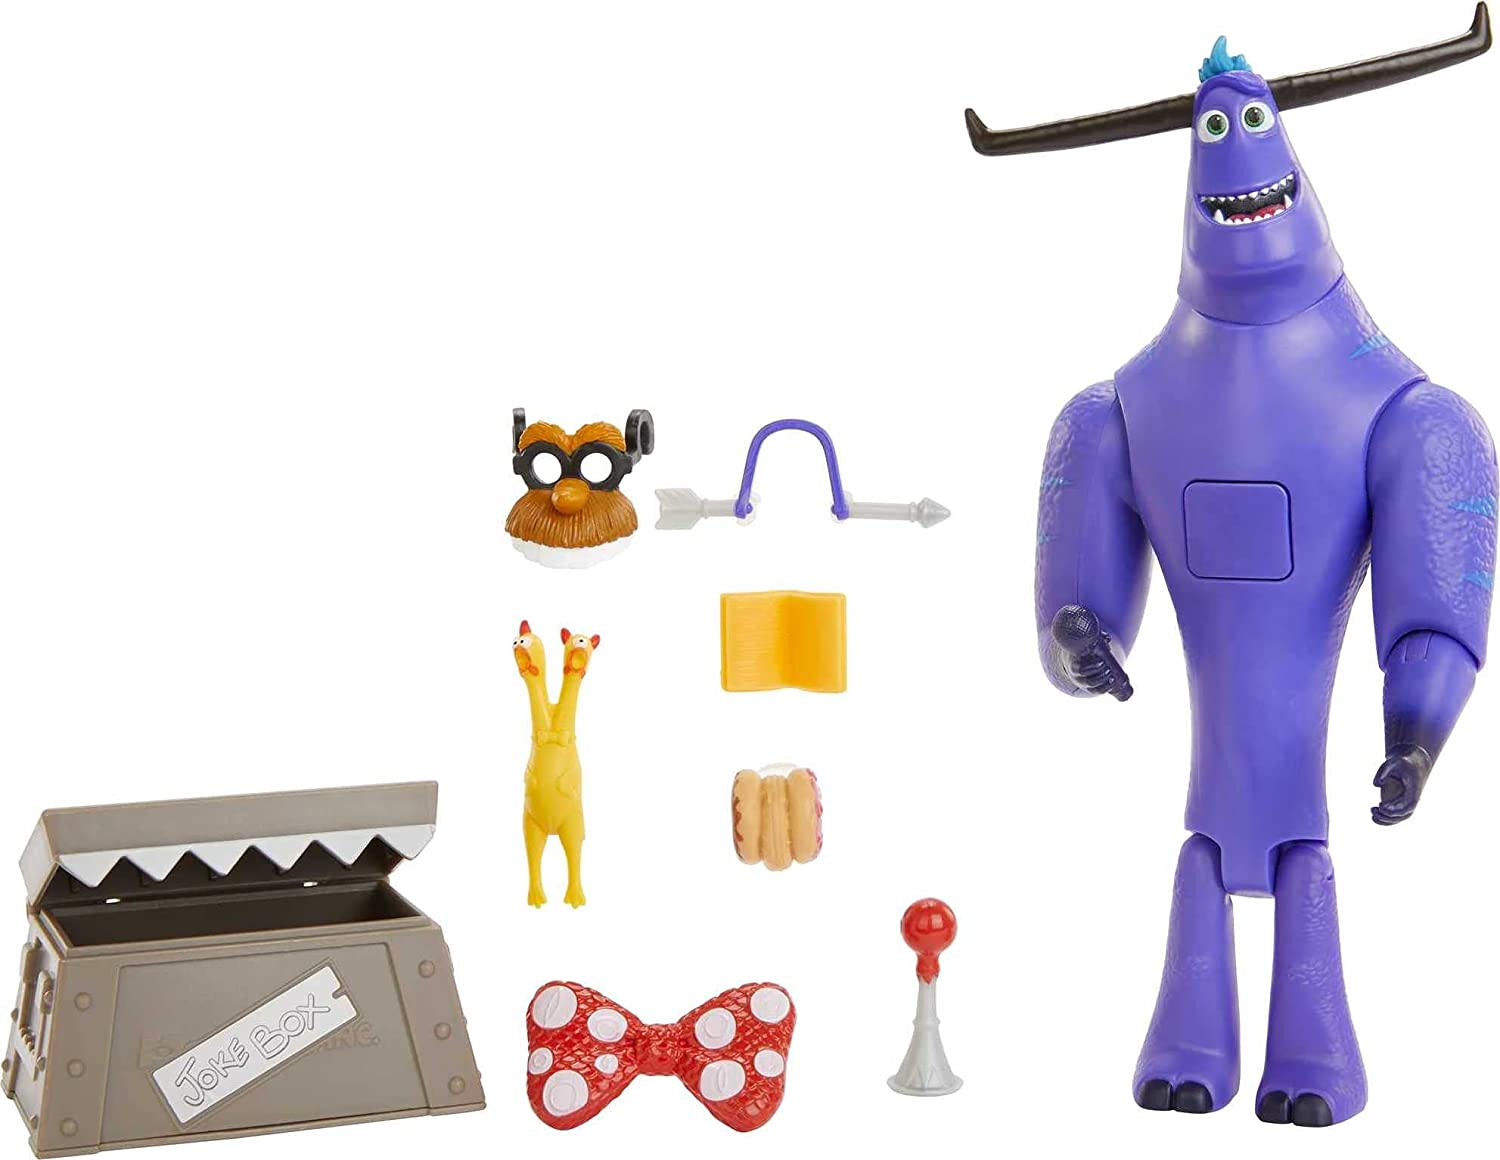 8" Mattel Monsters at Work Jokester Tylor Tuskmon Talking Interactive Figure w/ Accessories $7.30 + Free Shipping w/ Prime or on $25+